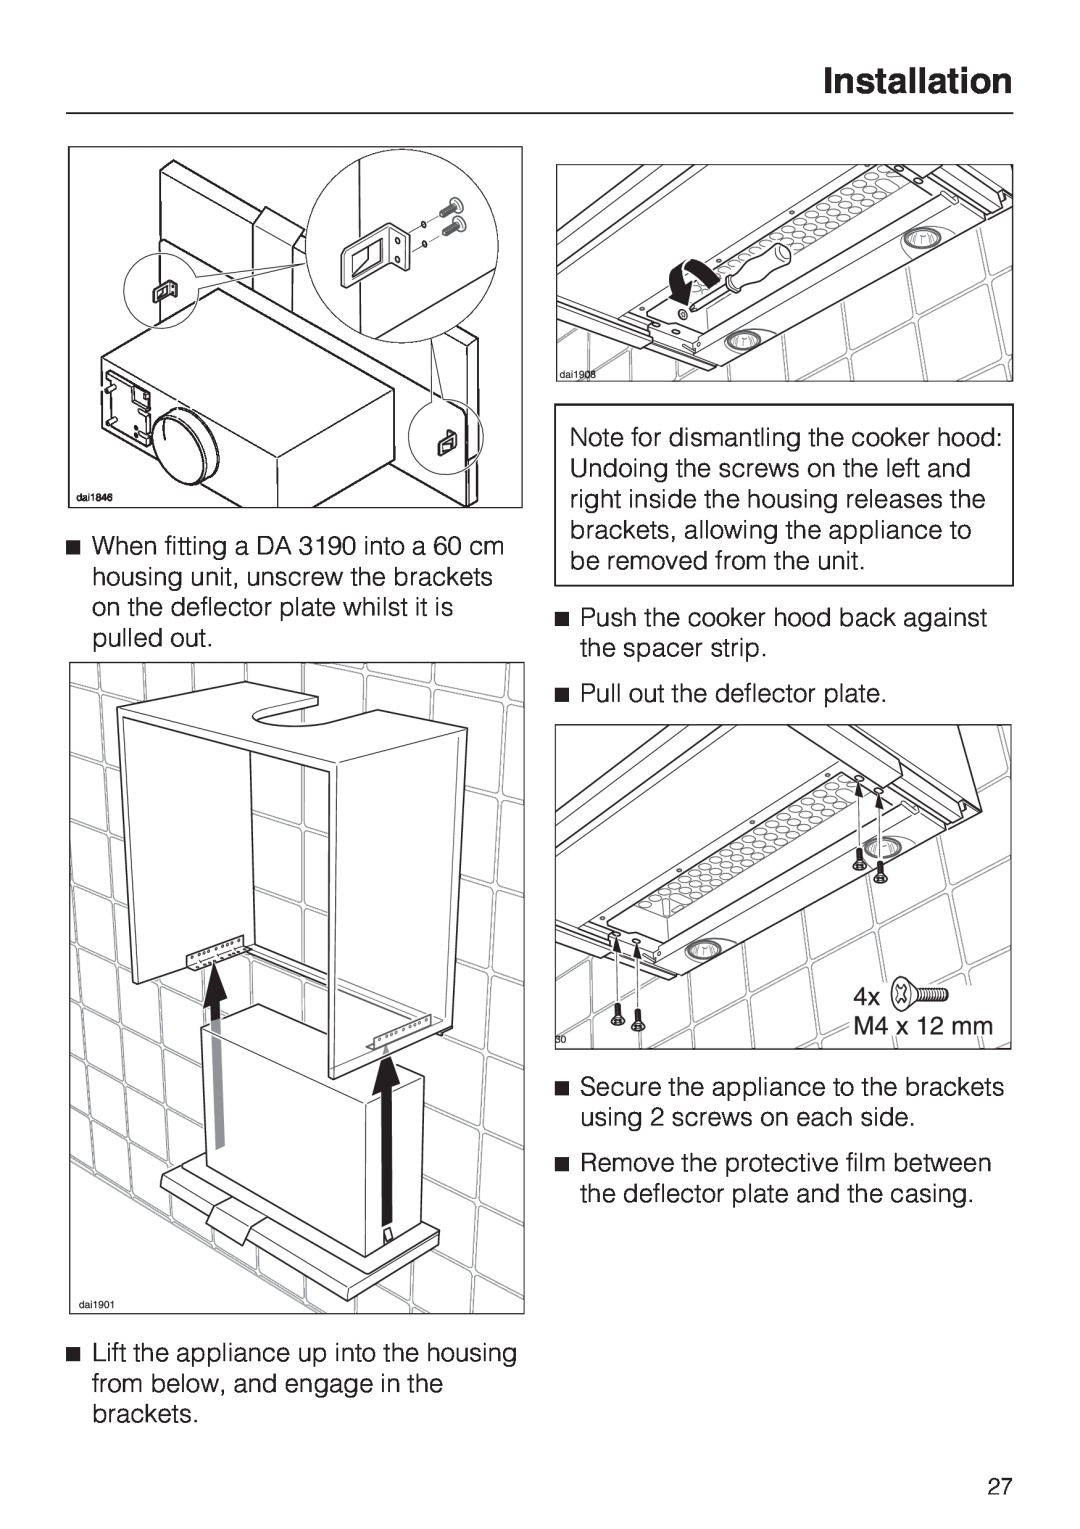 Miele DA 3160, DA 3190 installation instructions Installation, Push the cooker hood back against the spacer strip 